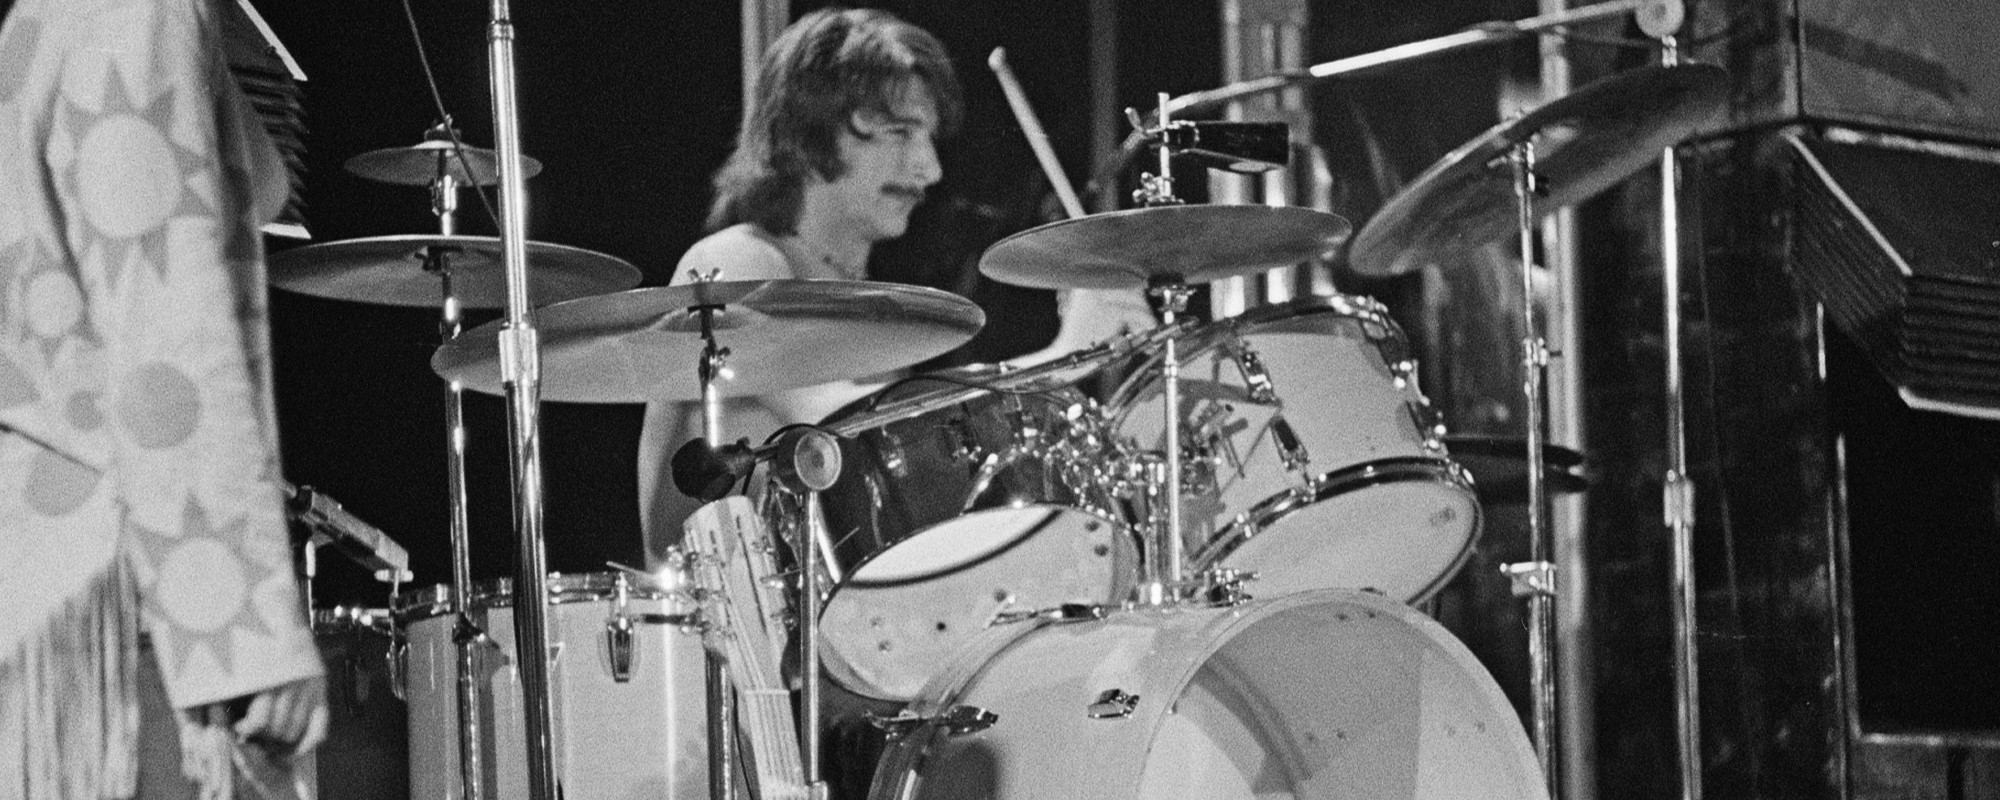 Drummer John Barbata Dead at 79, Played with The Turtles, CSNY, Jefferson Starship & Others